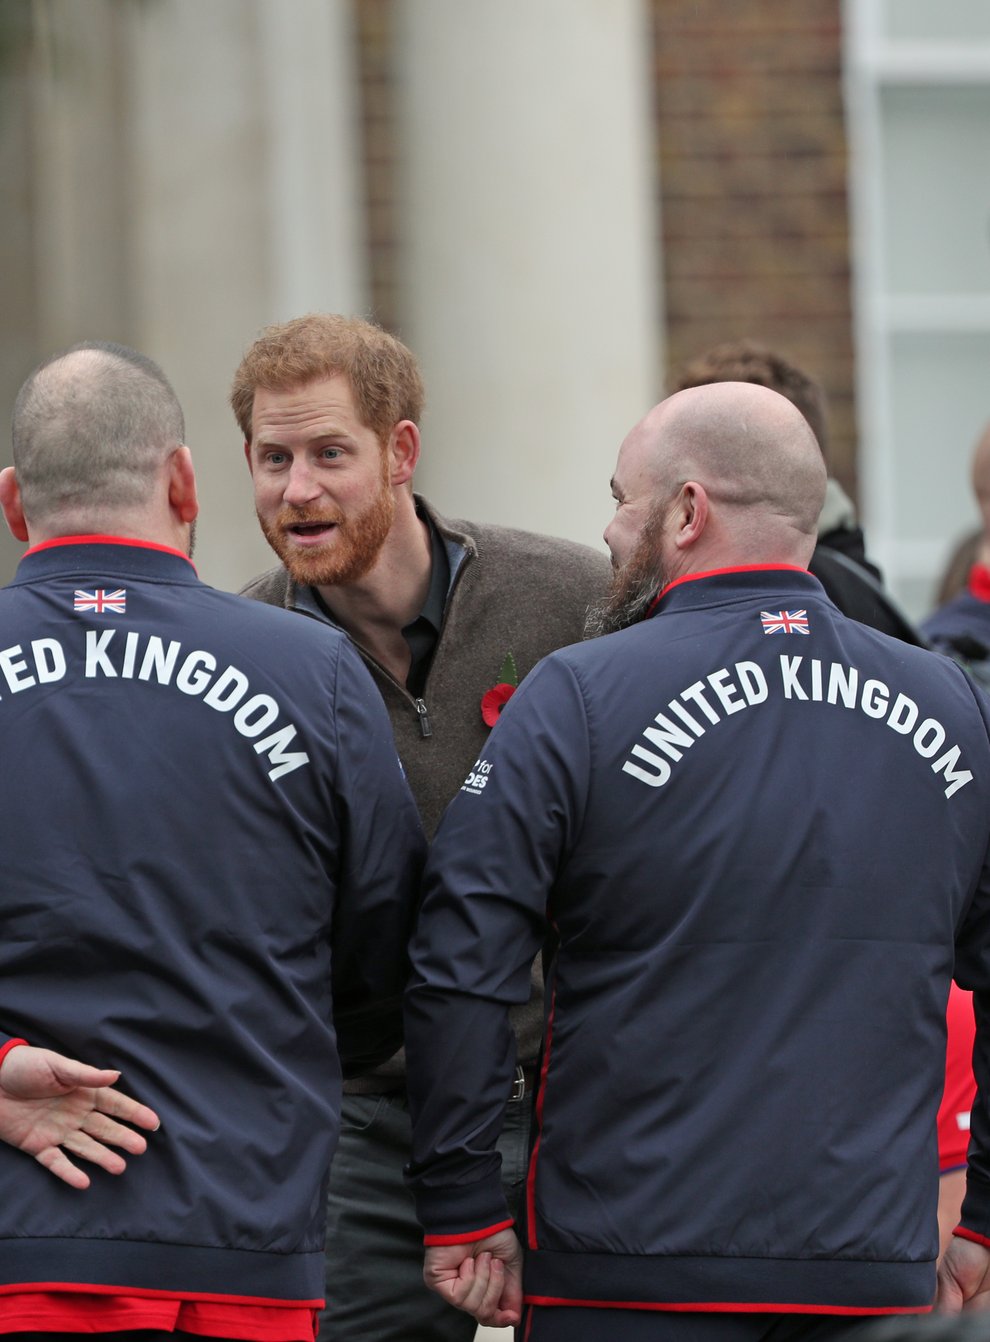 The Duke of Sussex meeting members of Team UK ahead of the abandoned 2020 Invictus Games